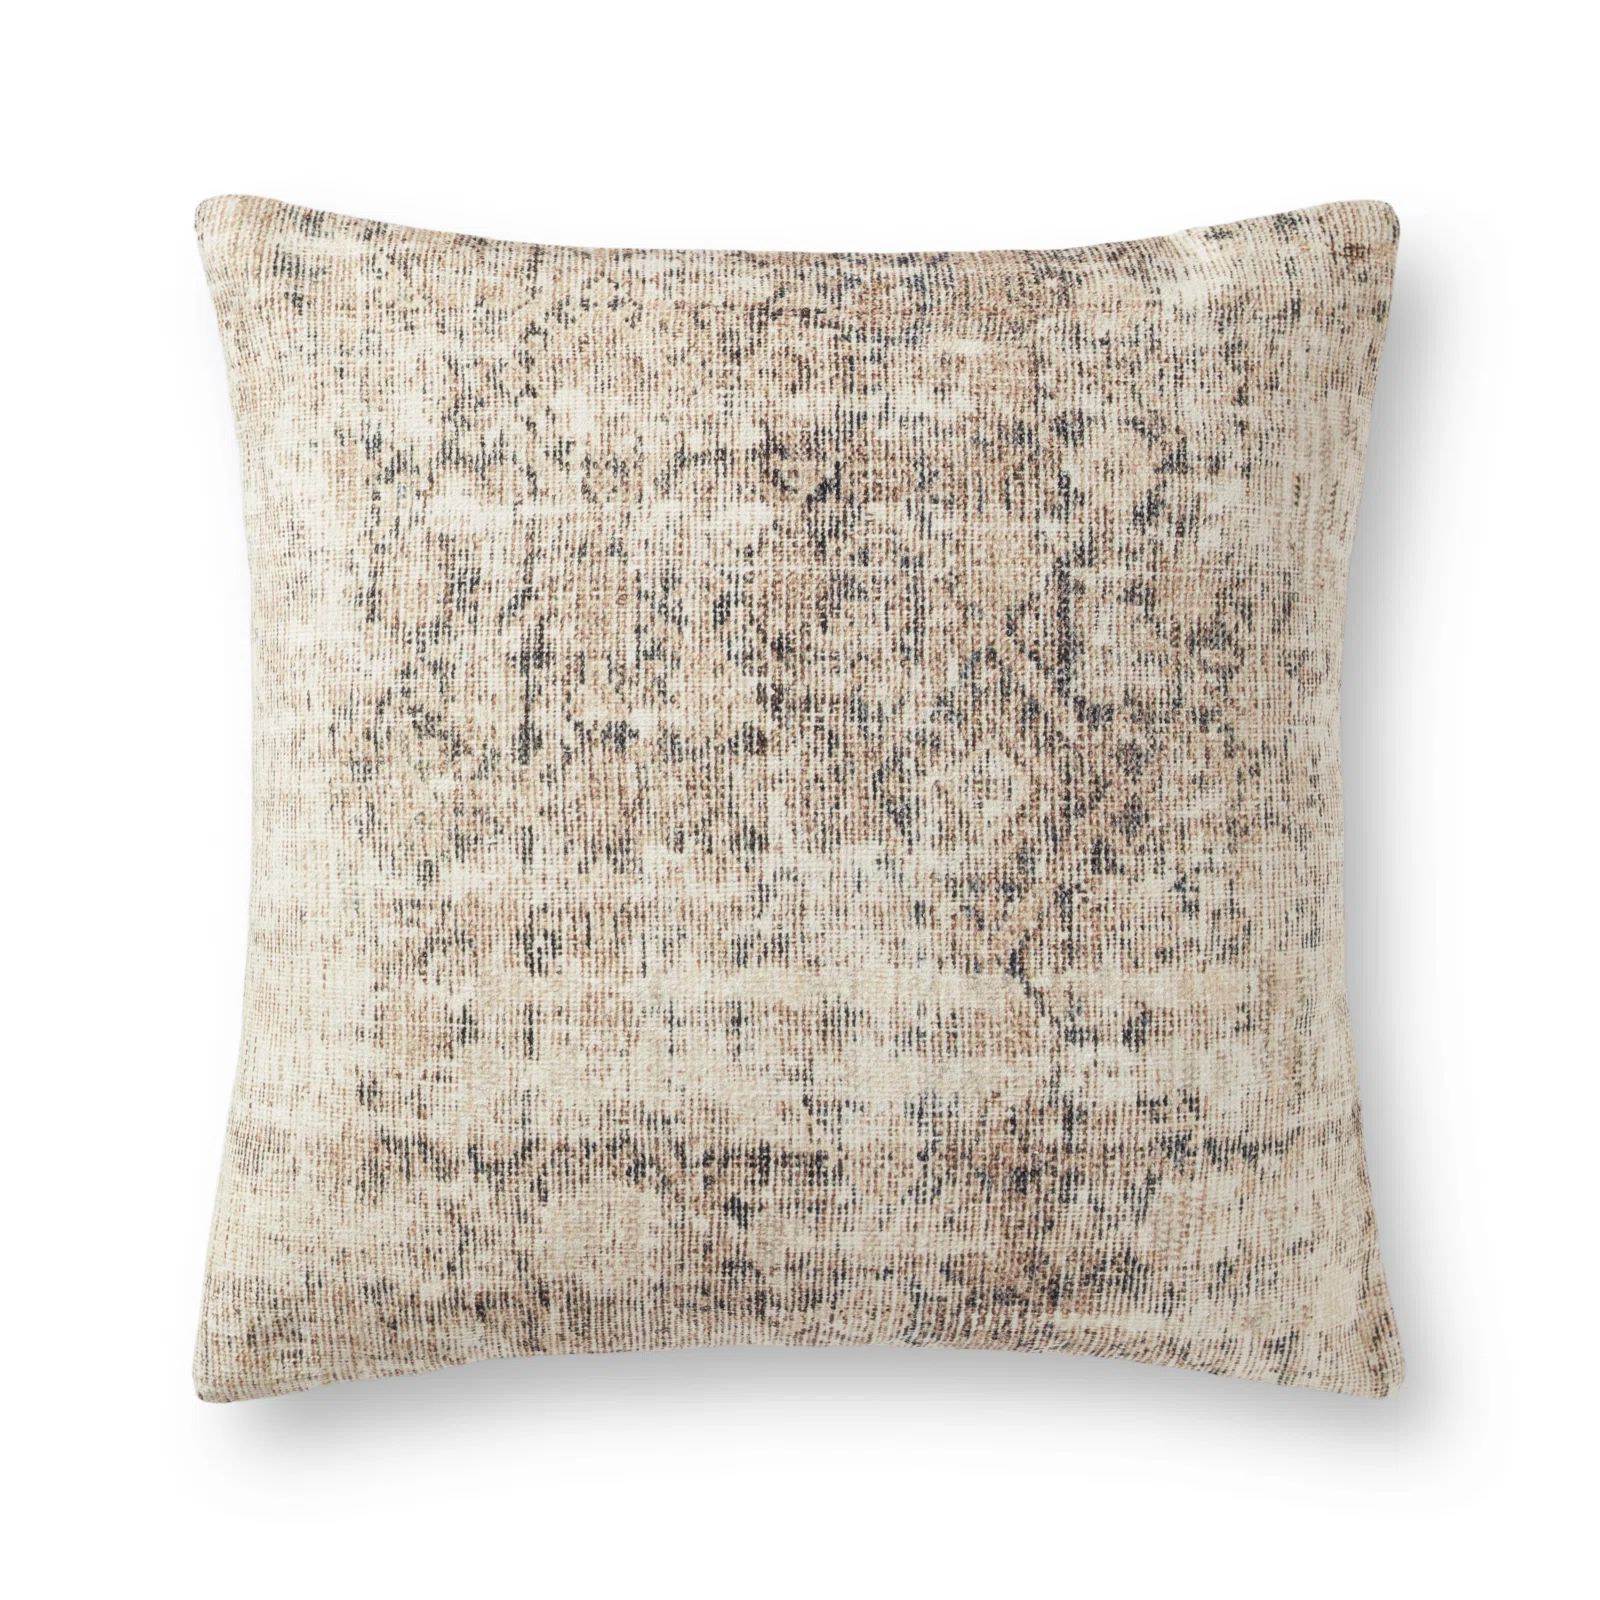 Larkspur Square Pillow Cover and Insert | Wayfair North America